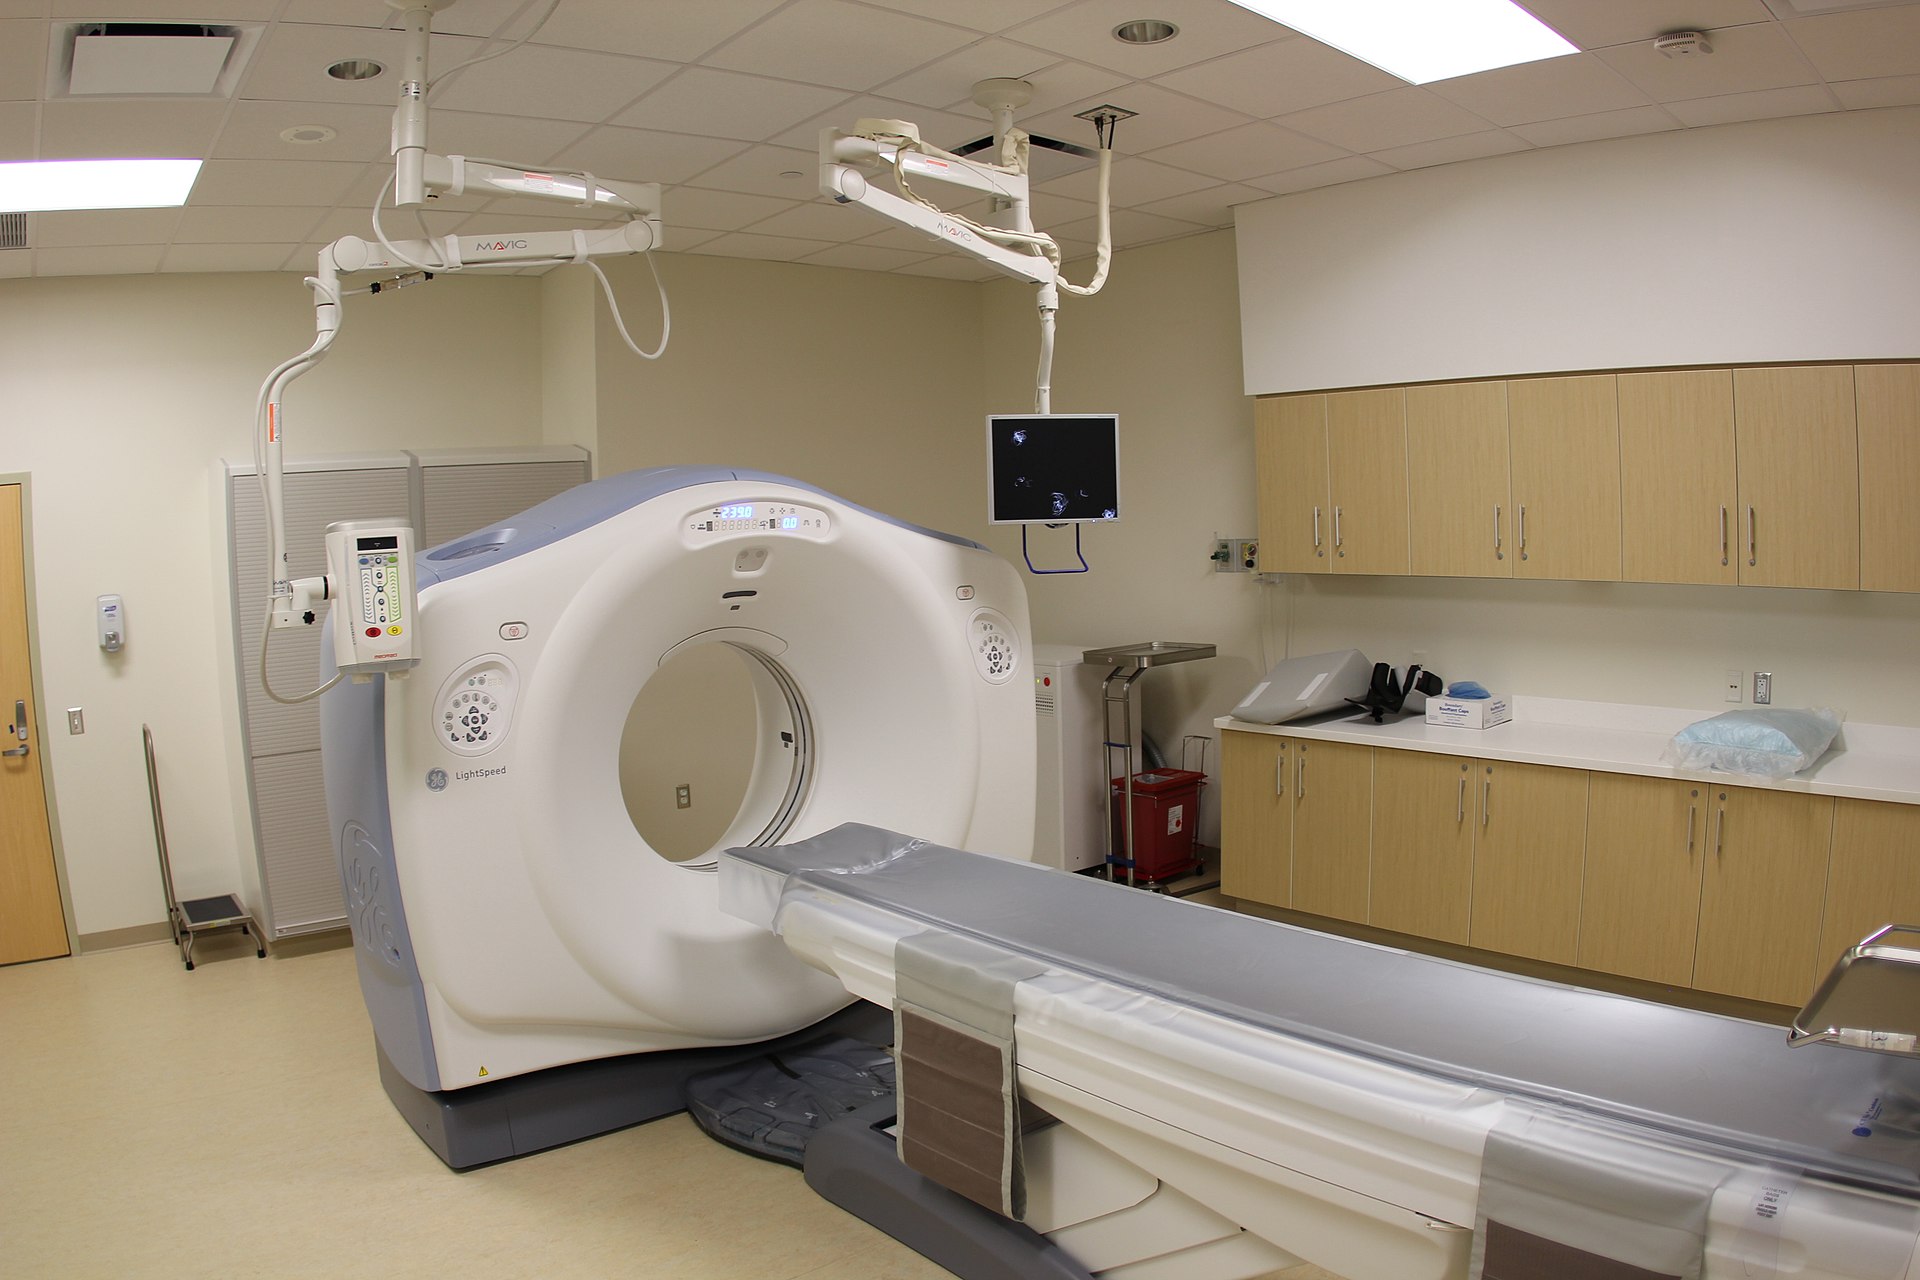 Scanner (https://en.wikipedia.org/wiki/CT_scan, crazypaco, CC BY)